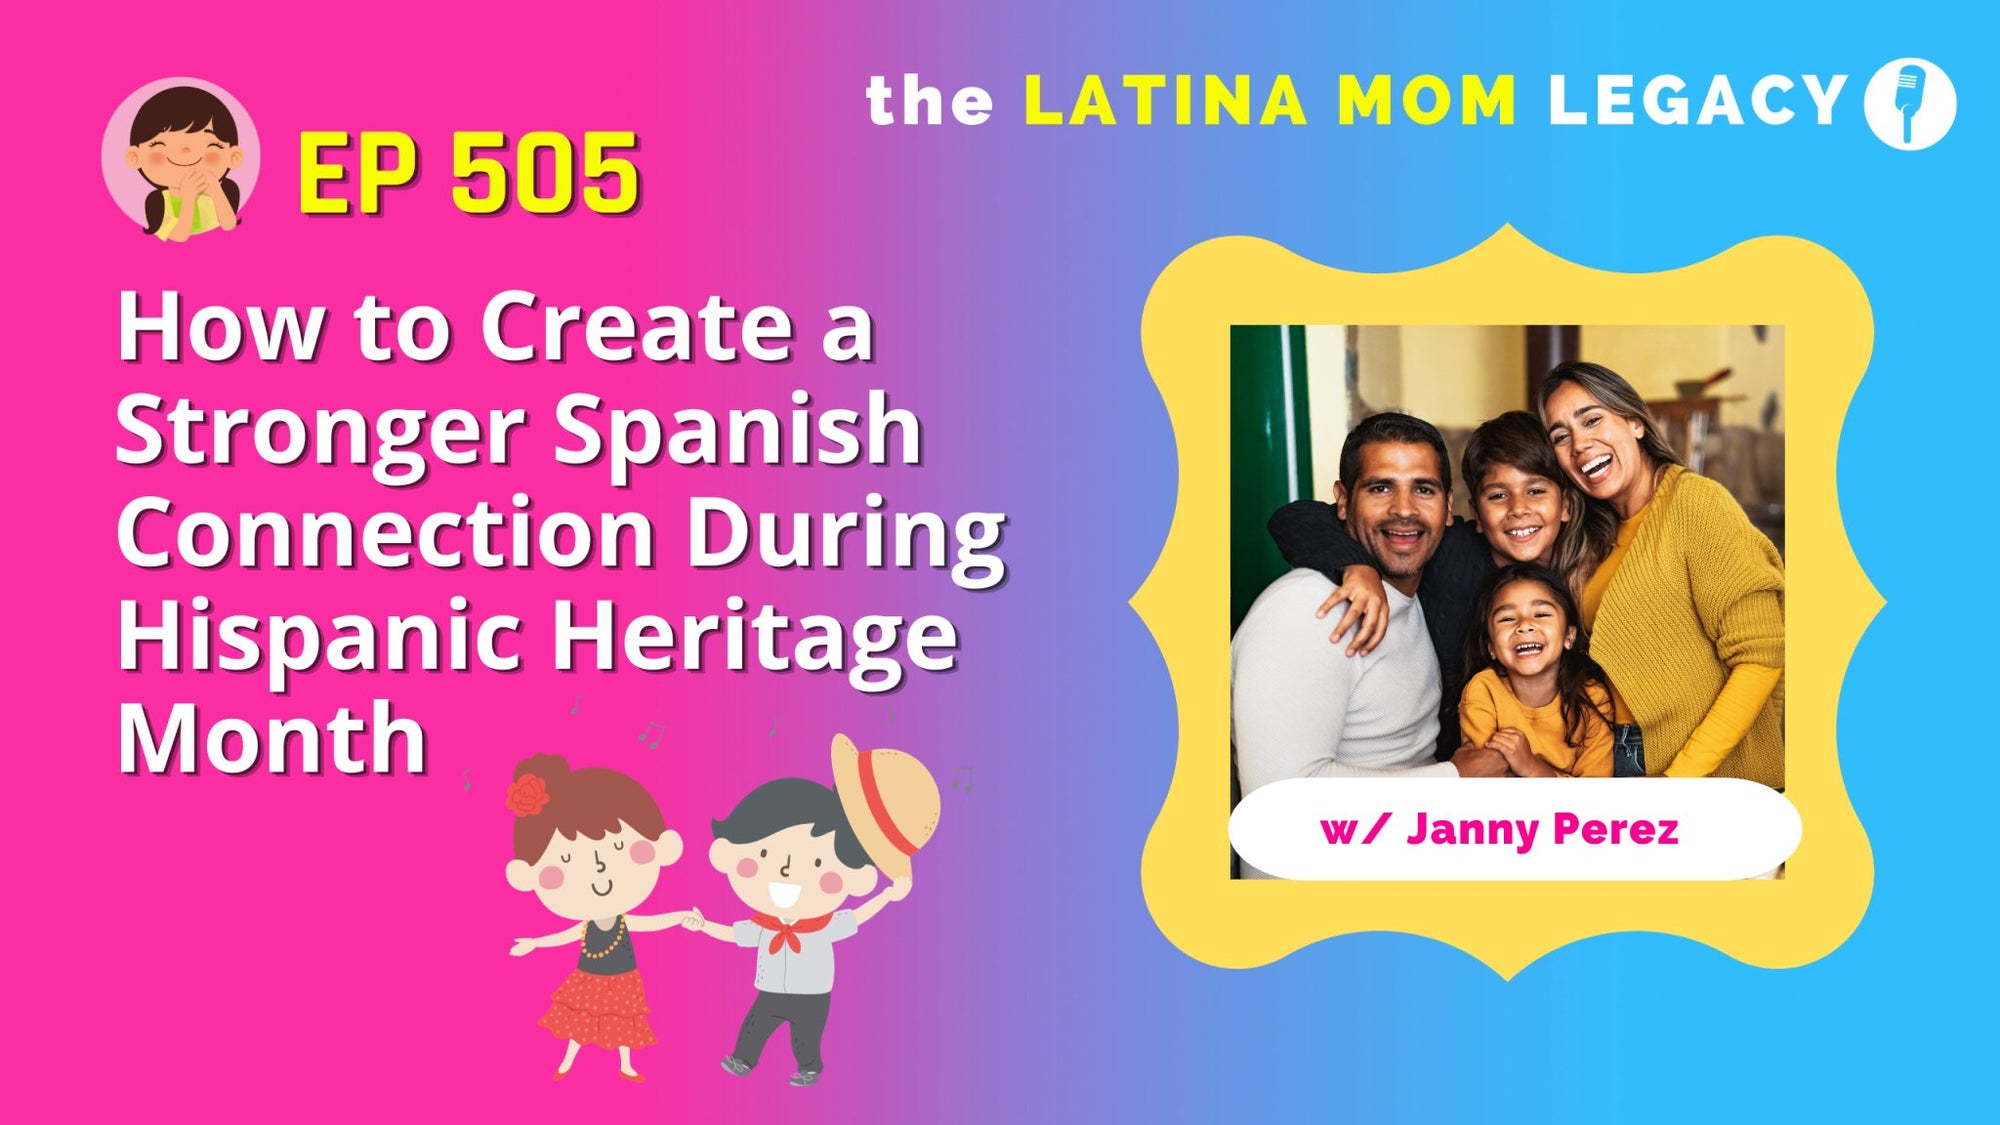 505-How to Create a Stronger Spanish Connection During Hispanic Heritage Month - Mi LegaSi